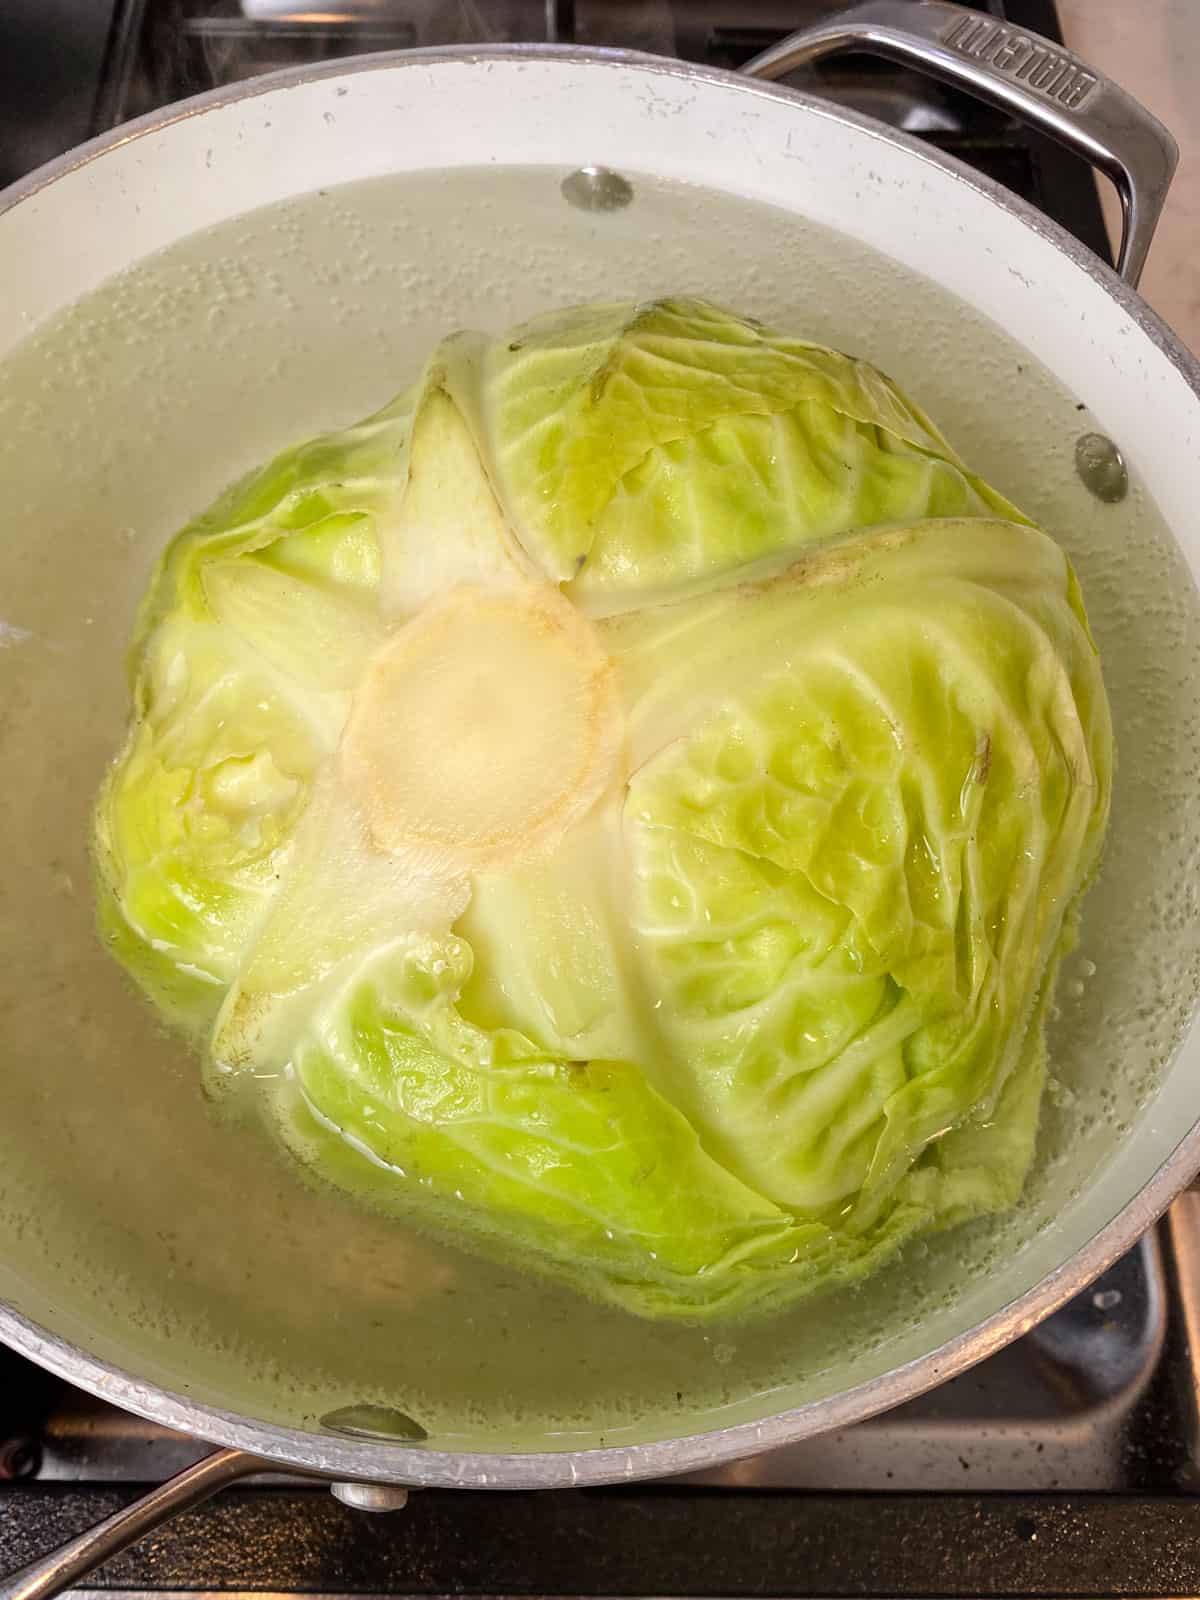 Place the whole cabbage in a pot of boiling water and boil until the outer leaves are pliable.